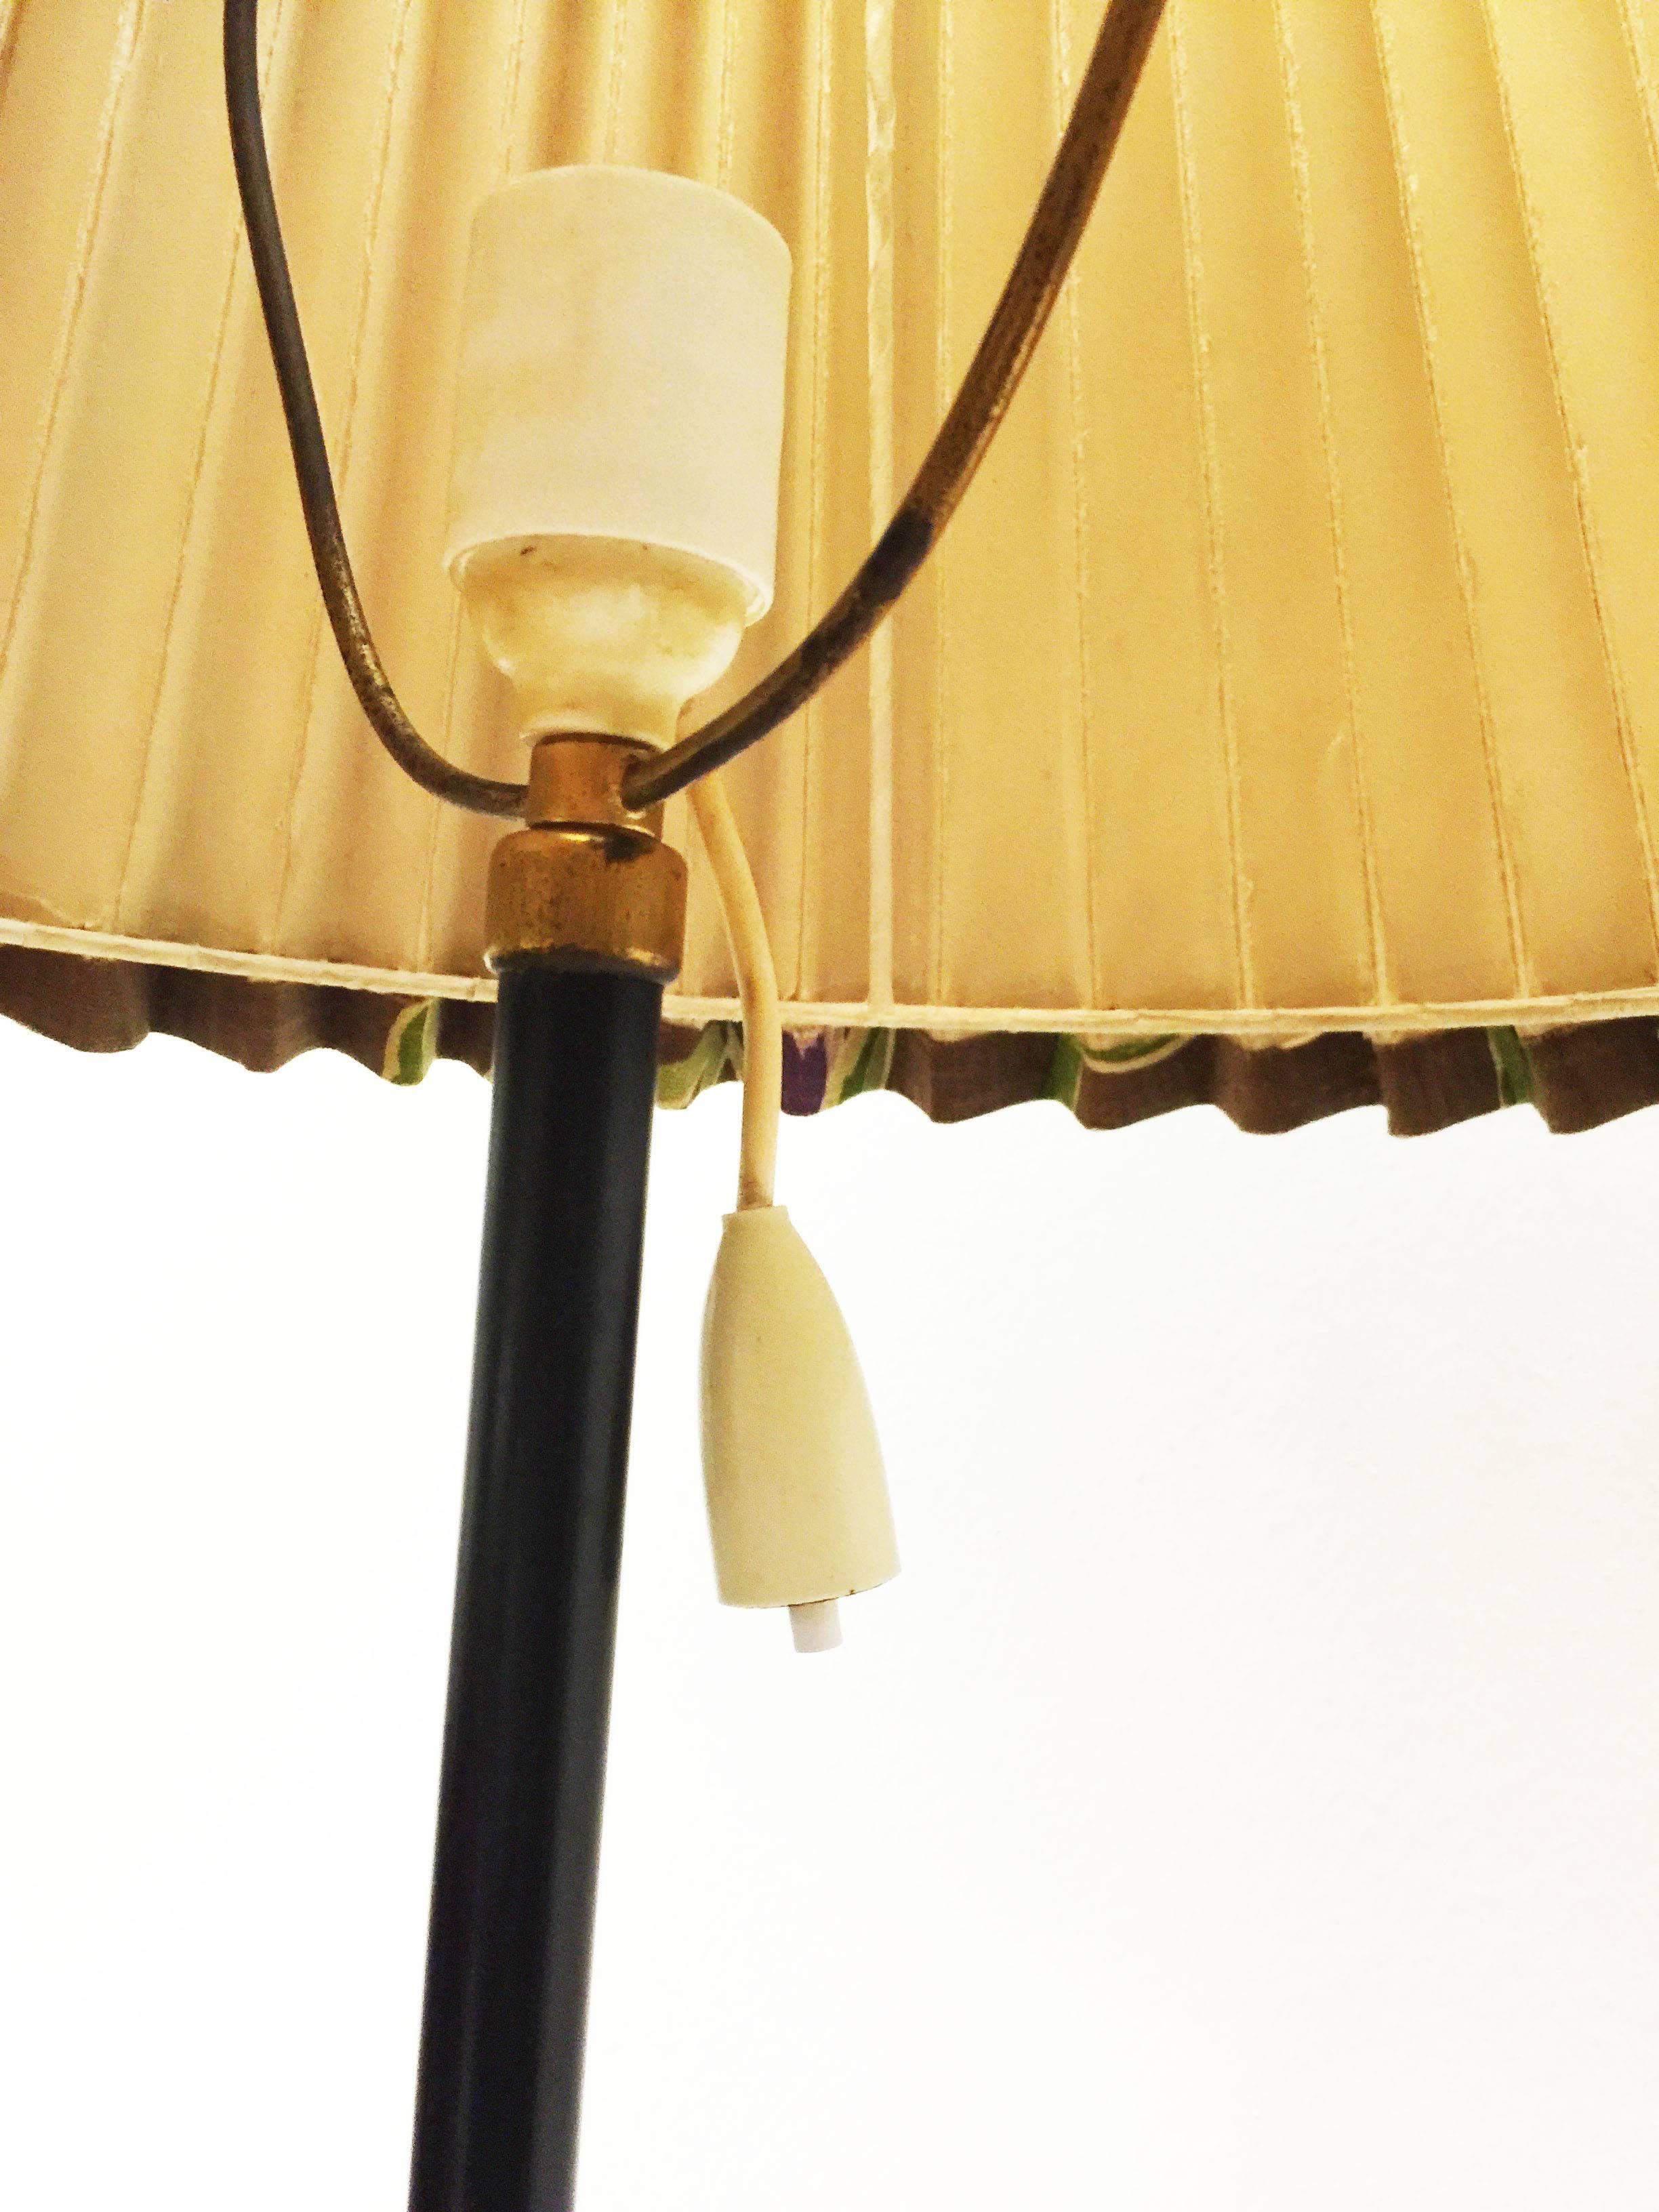 Rare J.T. Kalmar Lamp from the early 1960s.
Brass foot, black lacquered brass tube, pleated linen shade with floral motif. 
Small patina on brass foot.